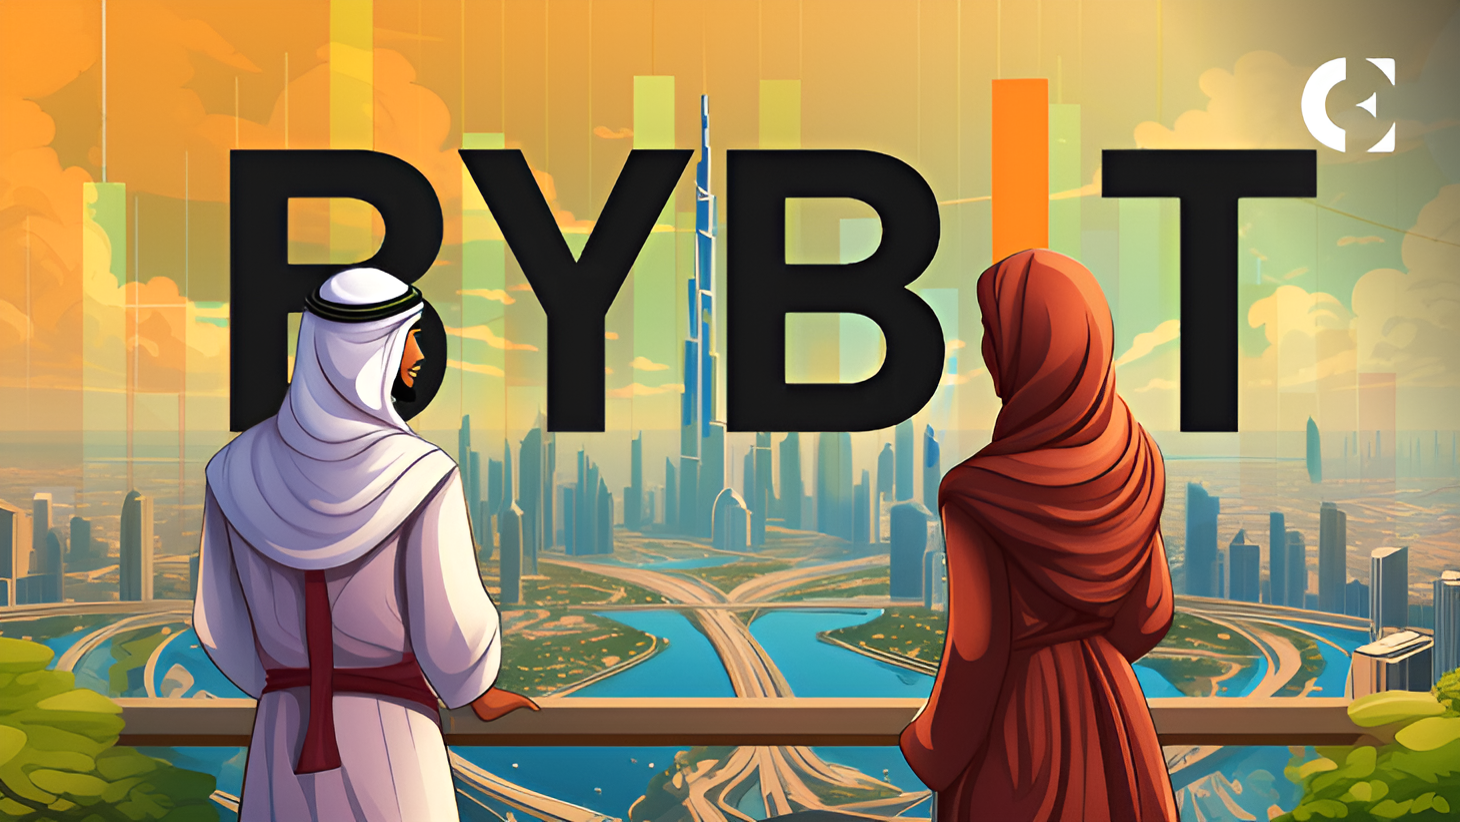 Crypto Exchange Bybit Grabs Global Spotlight After FTX Collapse